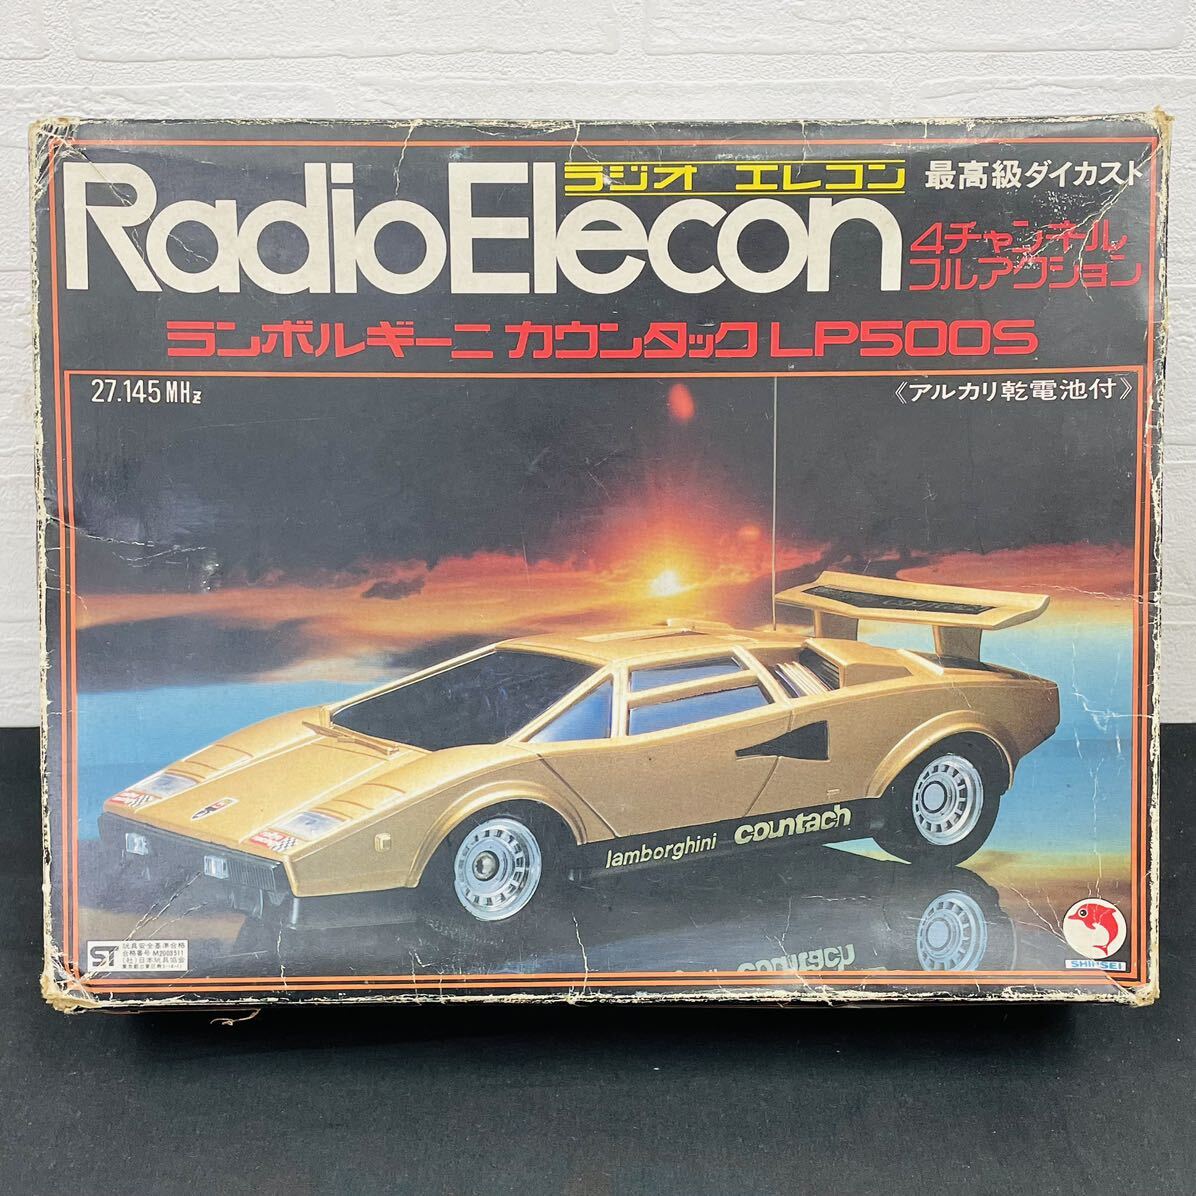 RadioElecon radio ere navy blue radio-controller Lamborghini counter kLP500S top class da squid -stroke 4 channel full action that time thing toy AT